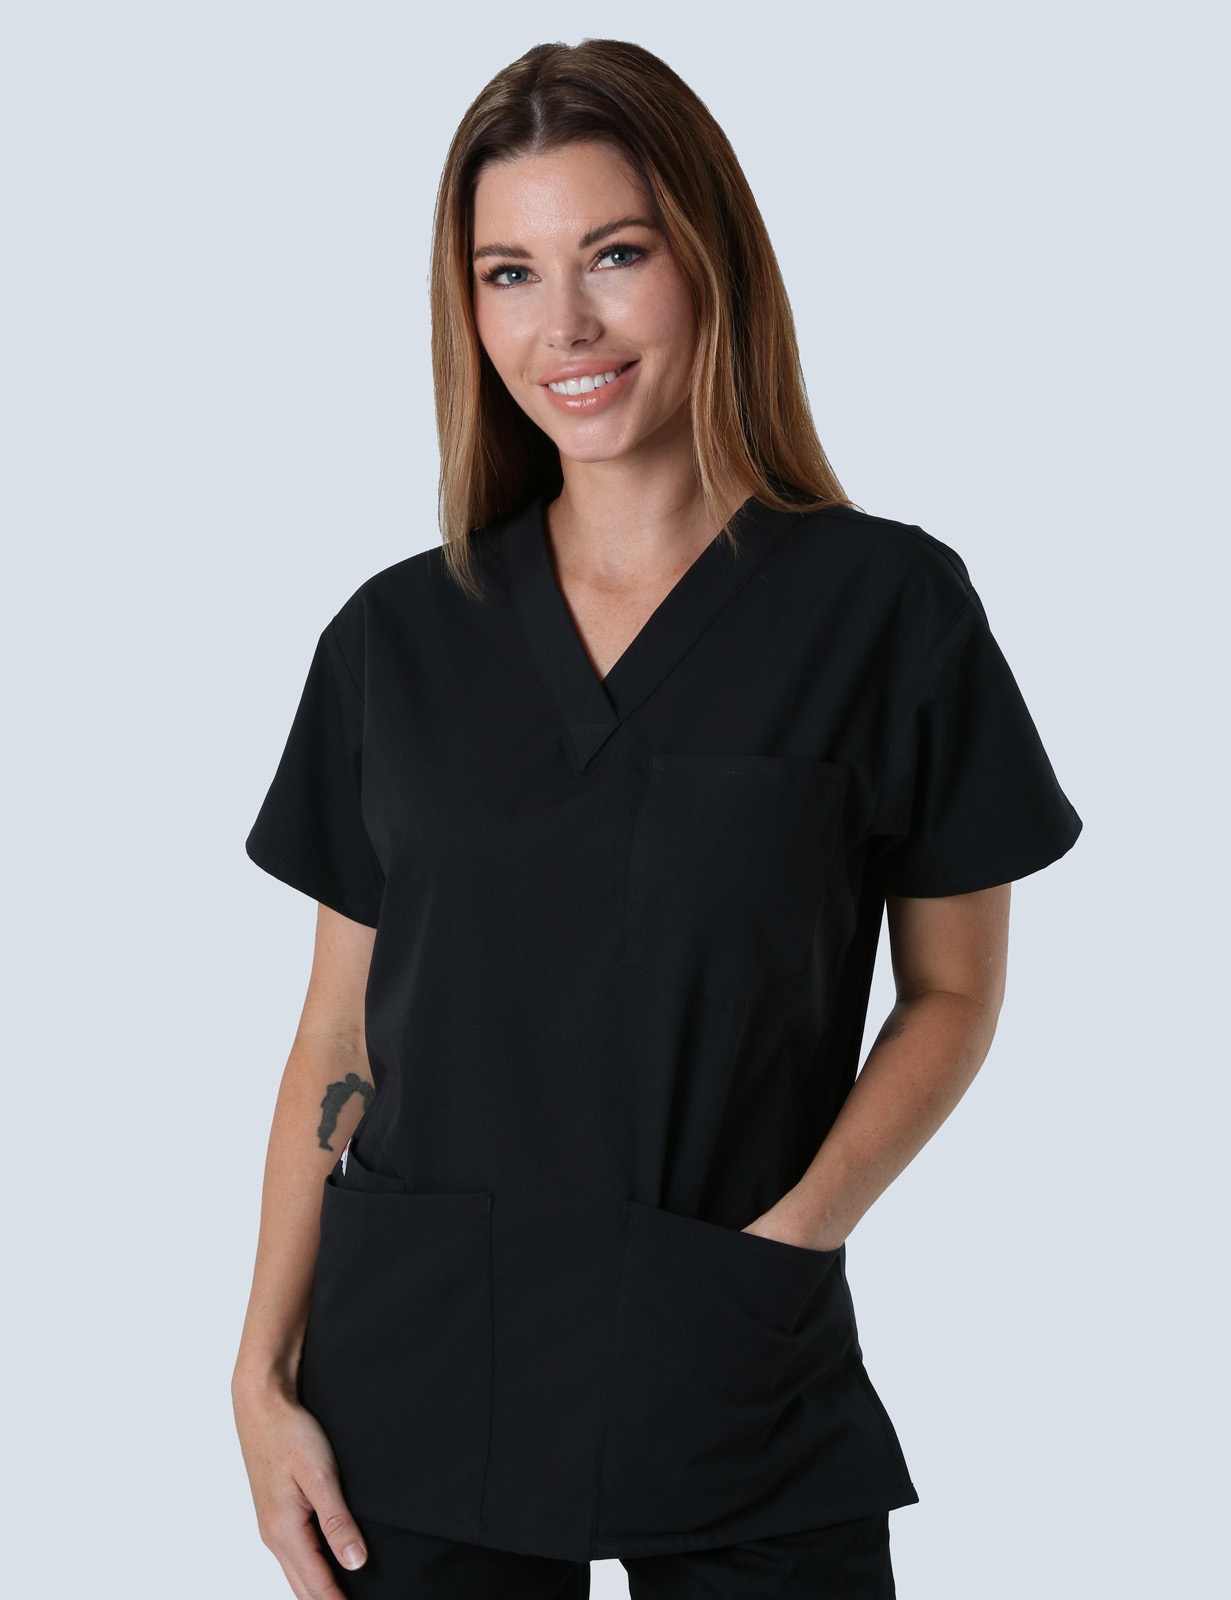 Holmesglen Private Hospital - ED DR (4 Pocket Scrub Top and Cargo Pants in Black incl Logos)